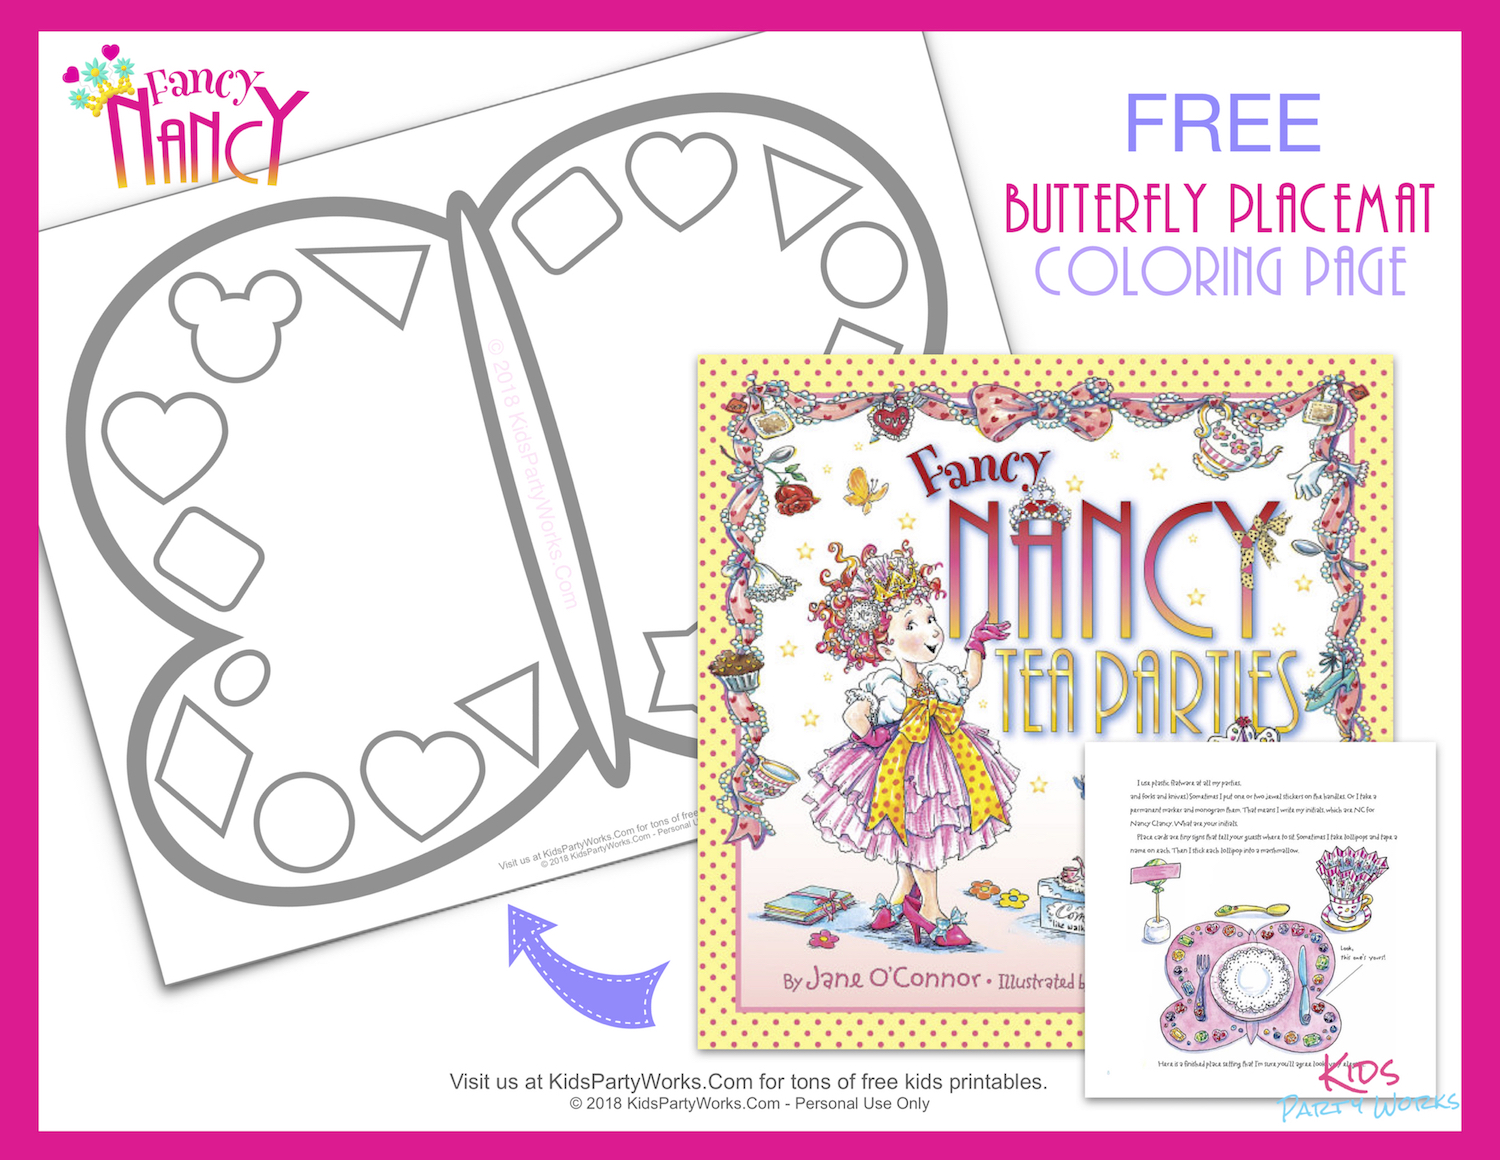 Kids will have fun coloring this Free printable Fancy Nancy Tea Parties butterfly placemat just like in the book.